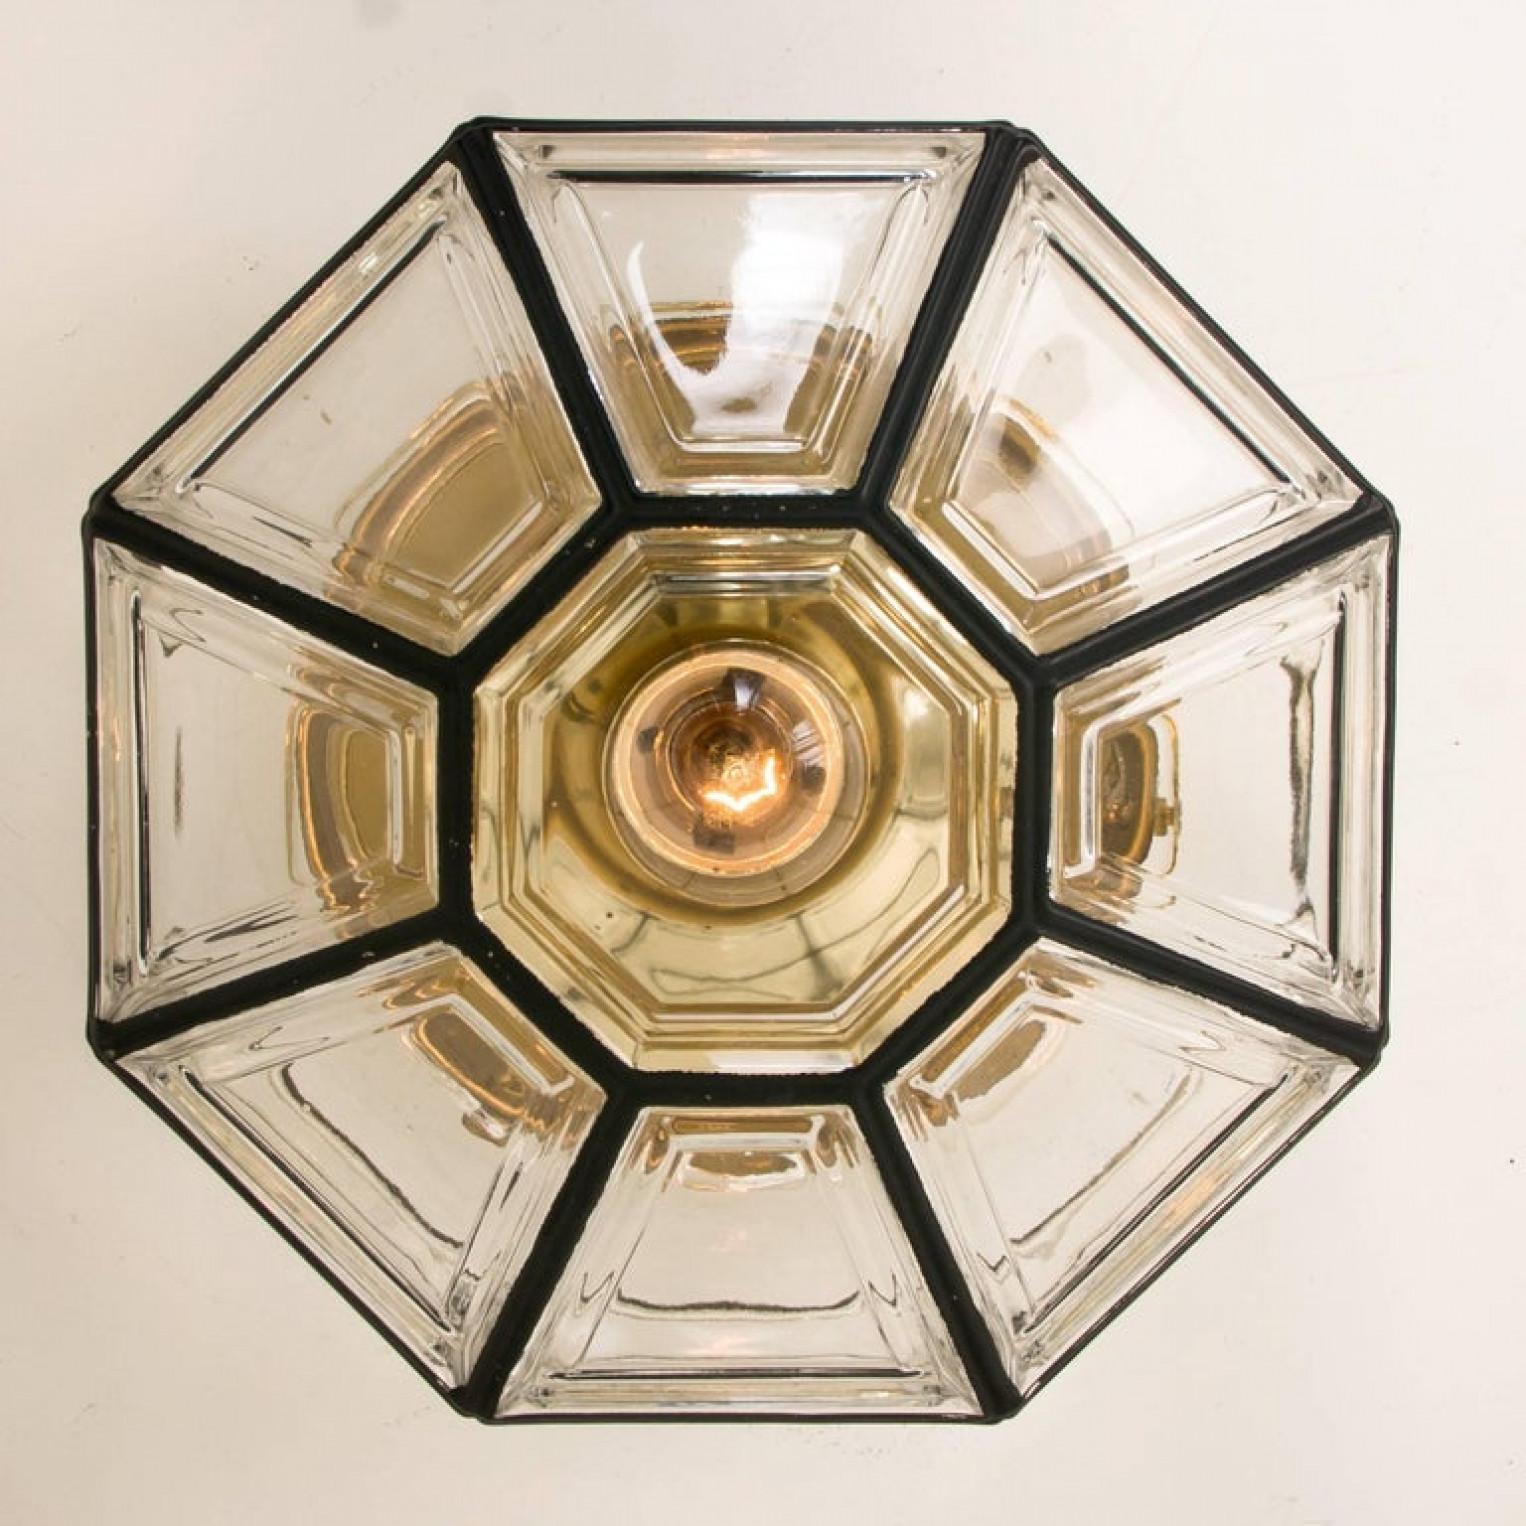 This octagonal glass light flush mounts or wall light is manufactured by Glashütte Limburg in Germany during the 1960s. Beautiful craftsmanship. The lamp, made from elaborate clear glass, features one E27 socket and brass suspension.

Very good